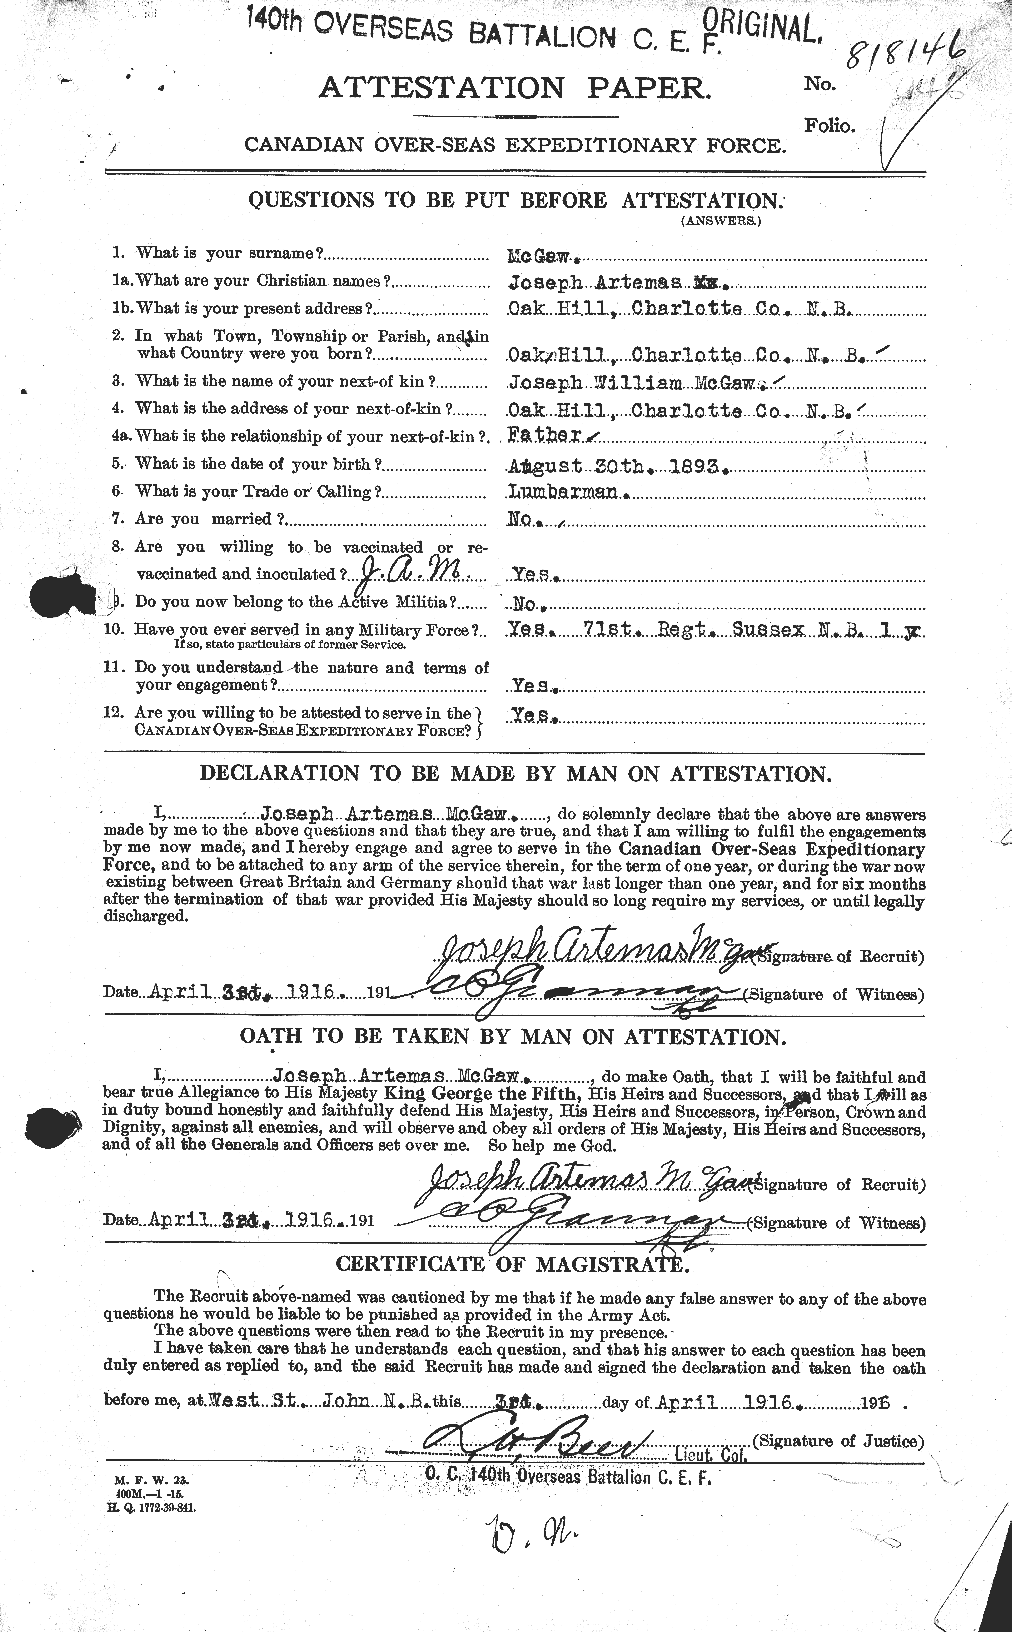 Personnel Records of the First World War - CEF 517054a